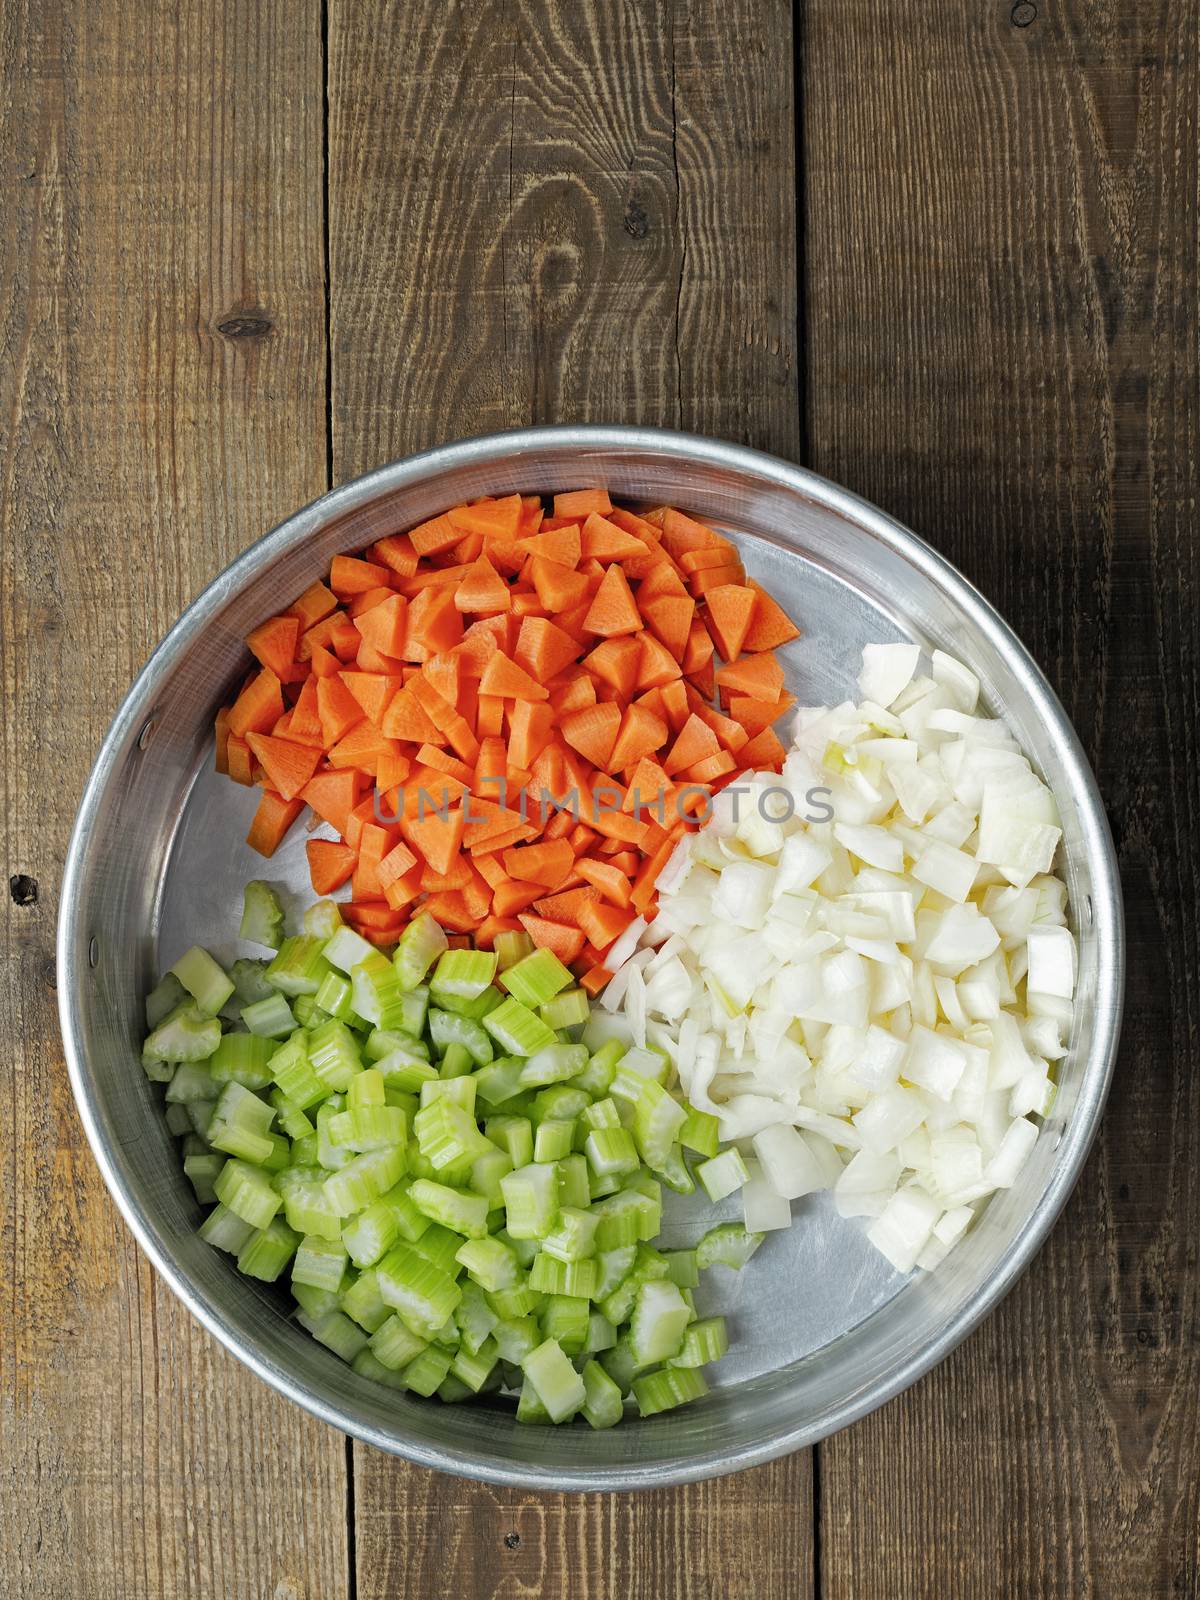 rustic diced carrot onion and celery by zkruger